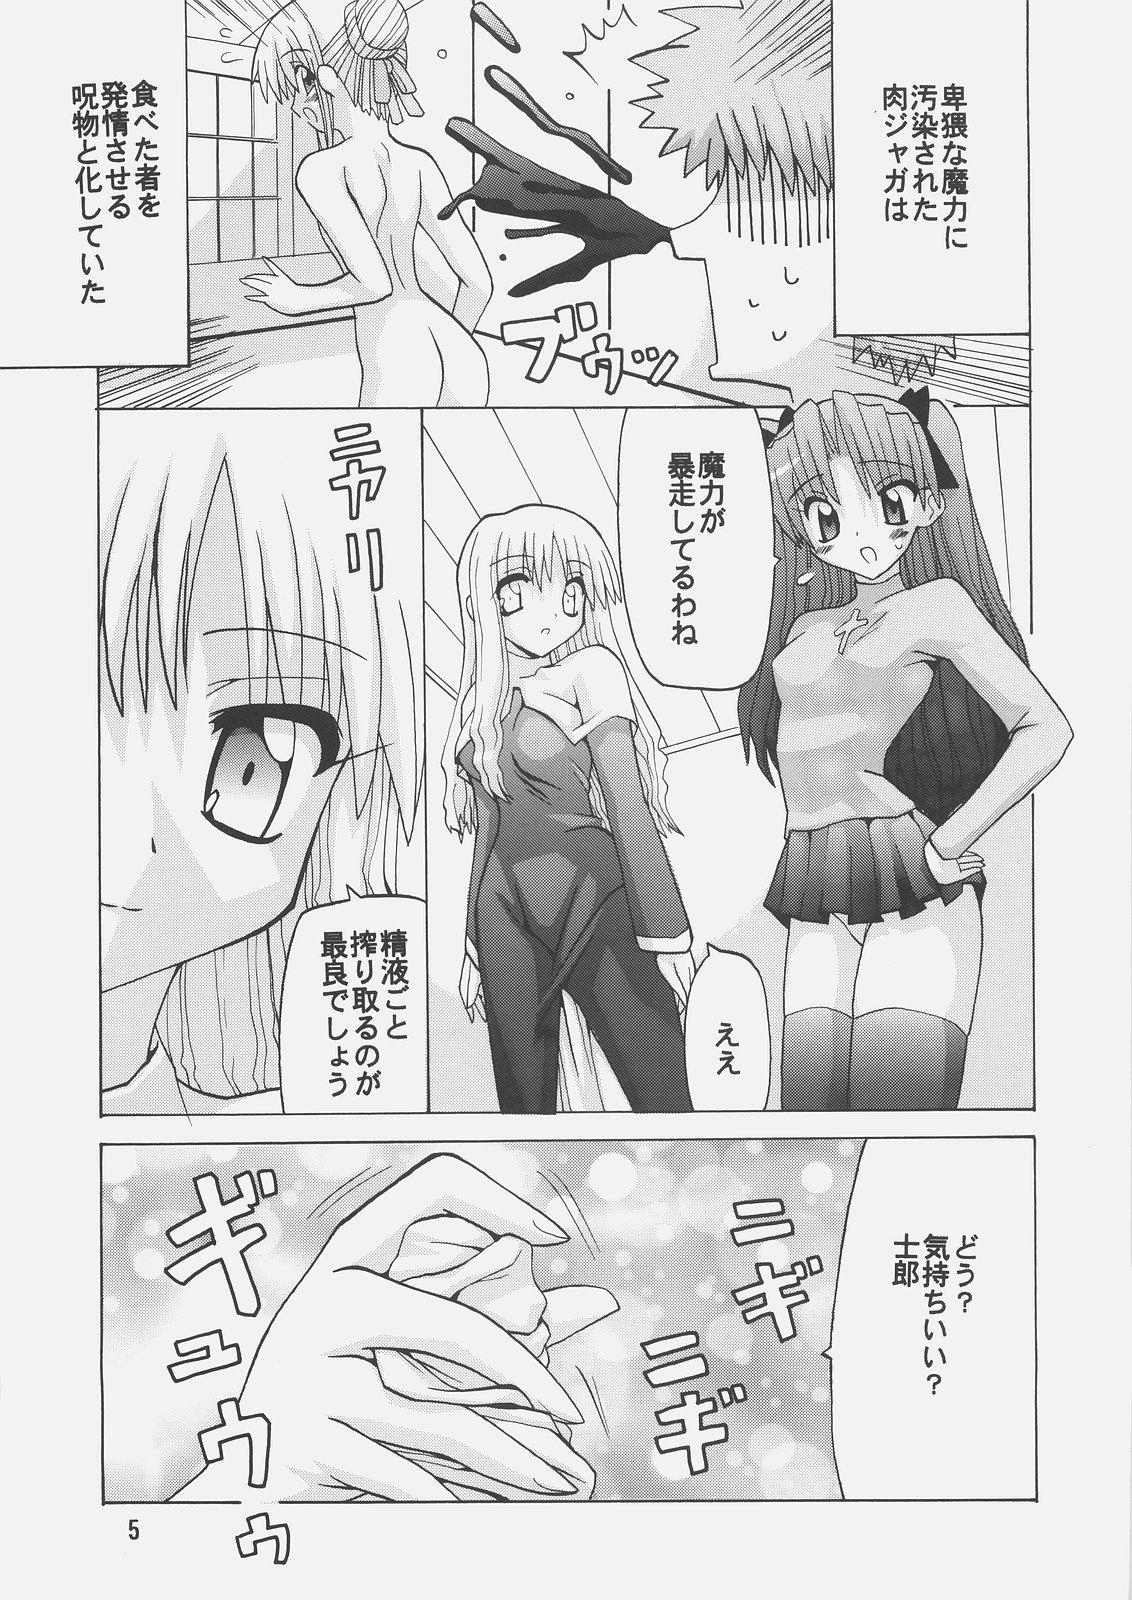 Korean Harem Route - Fate stay night Grande - Page 4